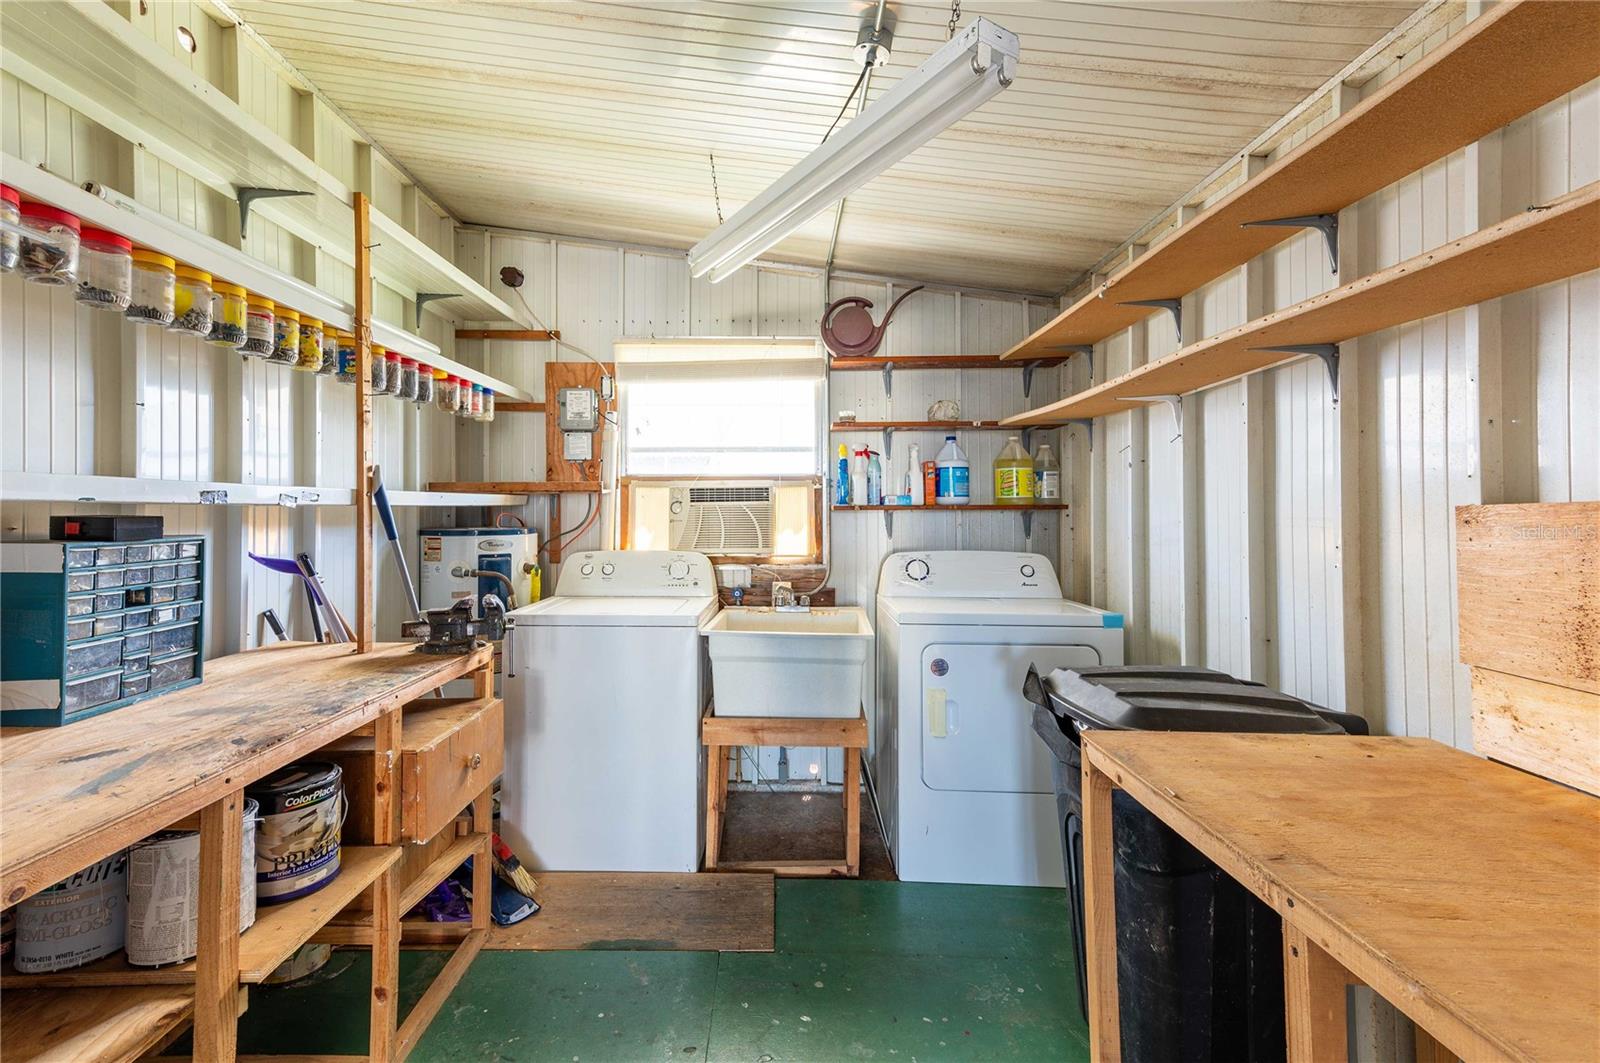 Workshop and laundry area off of screen room.